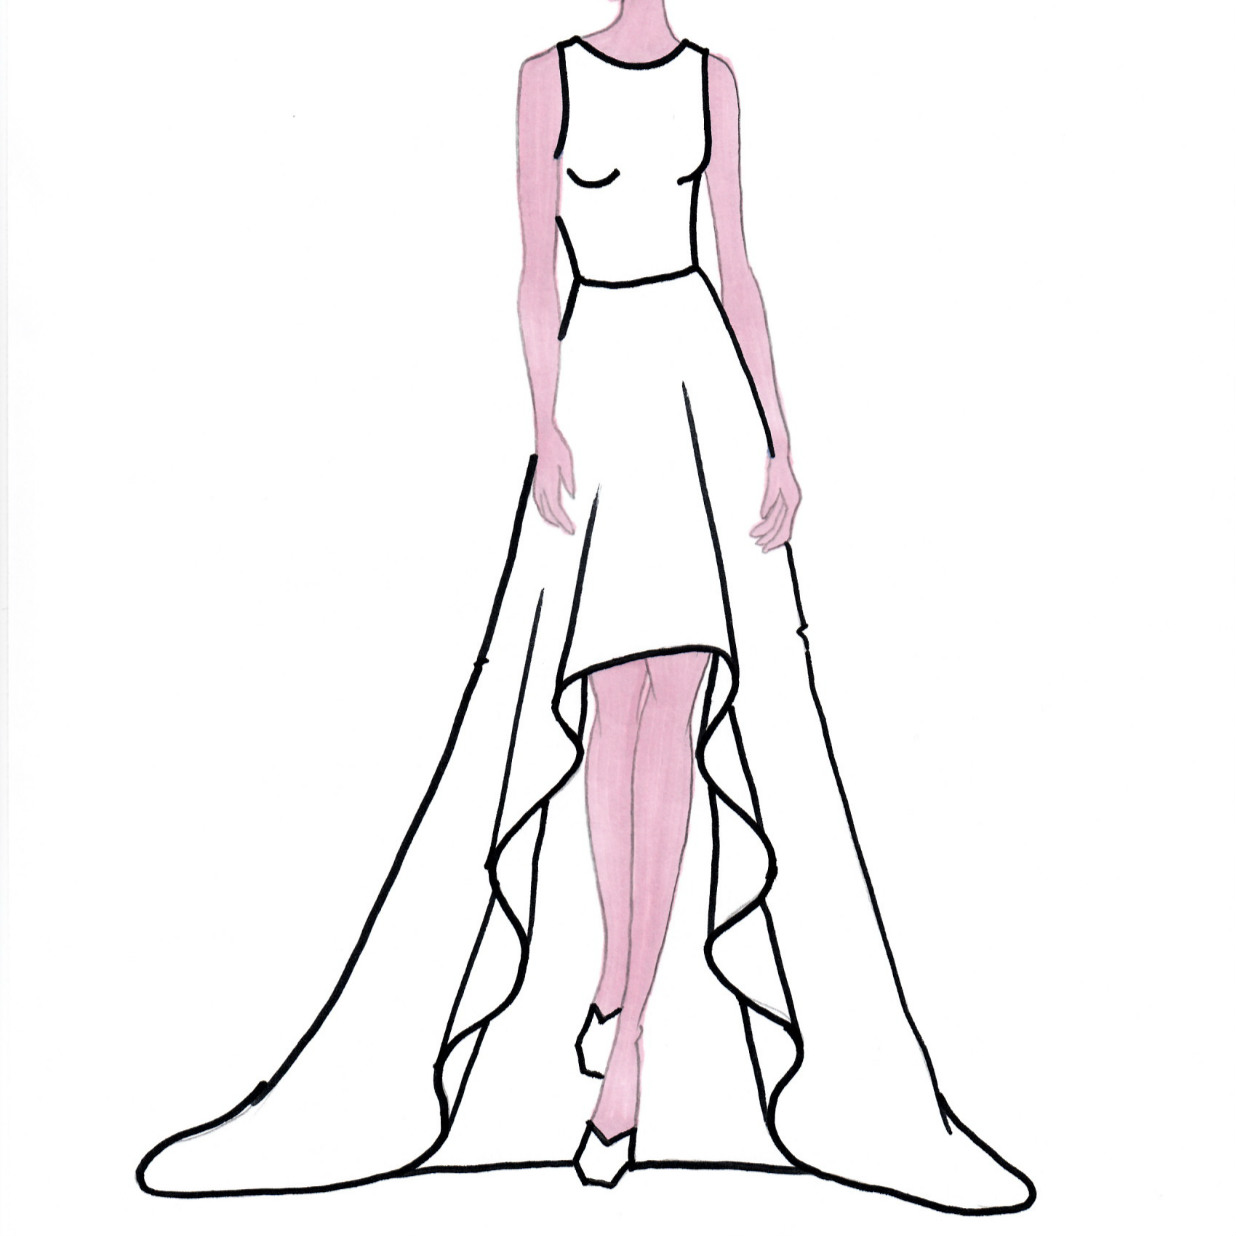 Simple Model Dress Drawing - Draw your model and then think about the